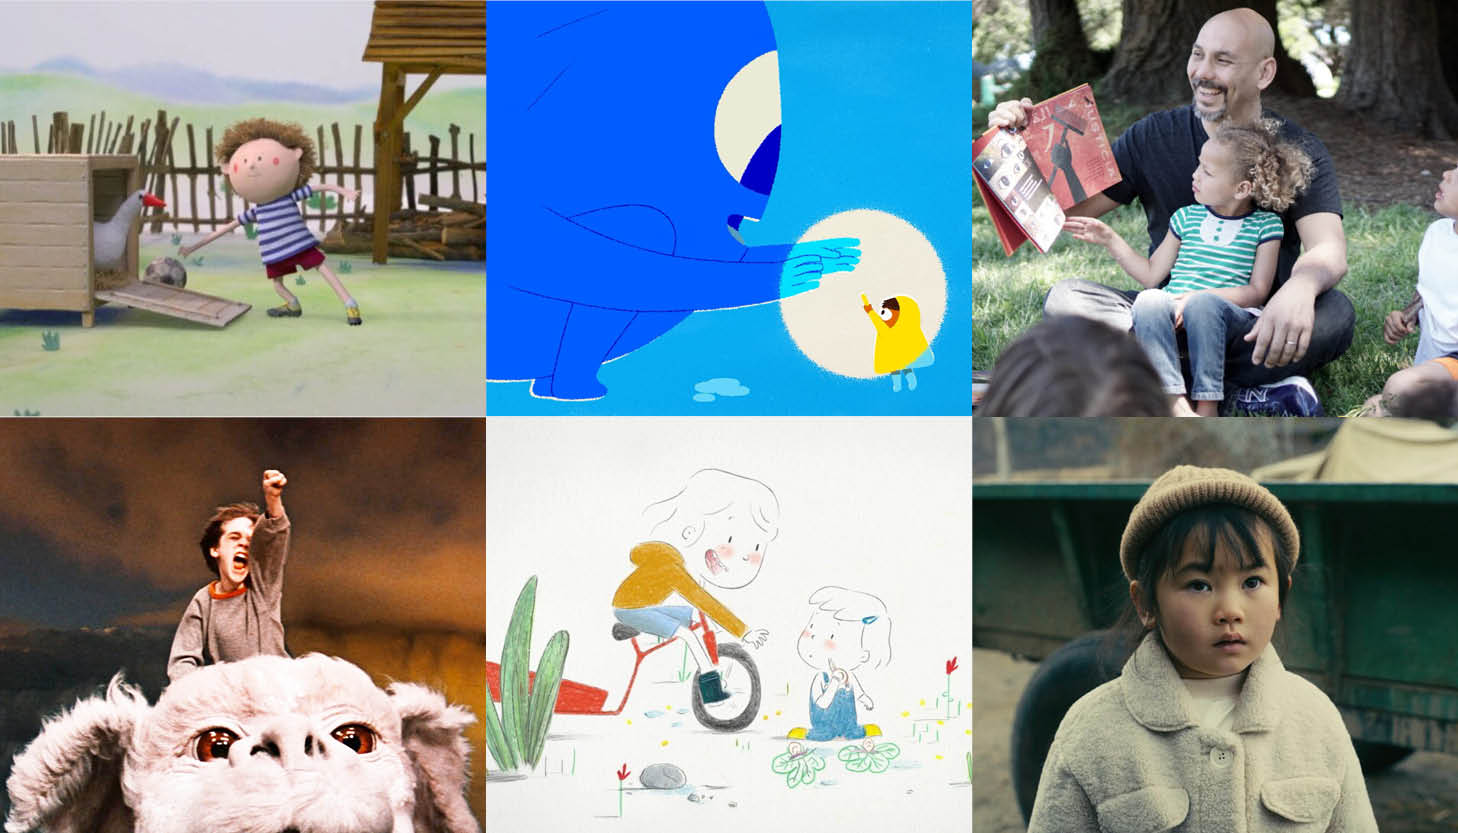 Collage of animated film stills and an image of a man reading a book to children outdoors. 